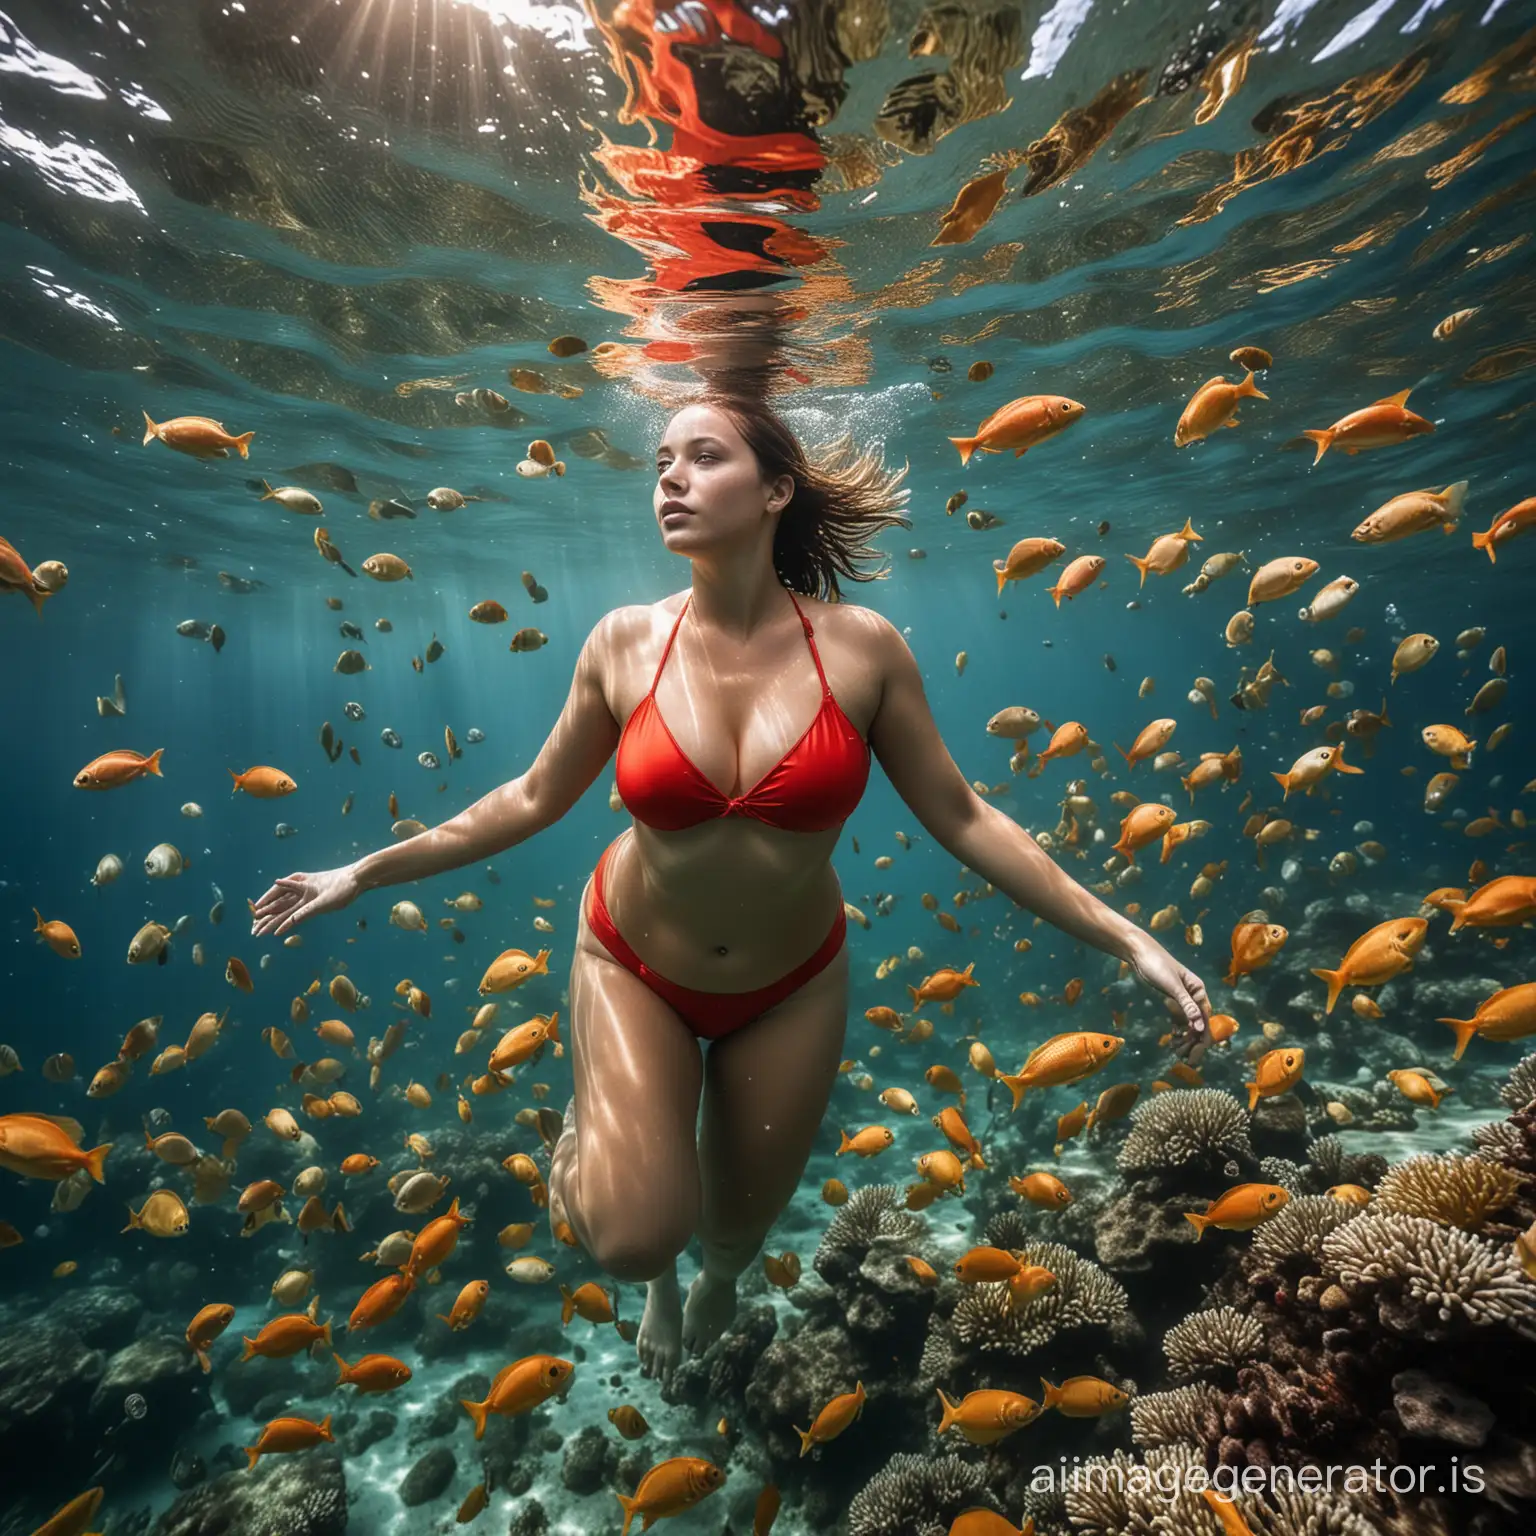 Plump-Female-Swimmer-in-Red-Bikini-Underwater-with-Colorful-Fish-and-Coral